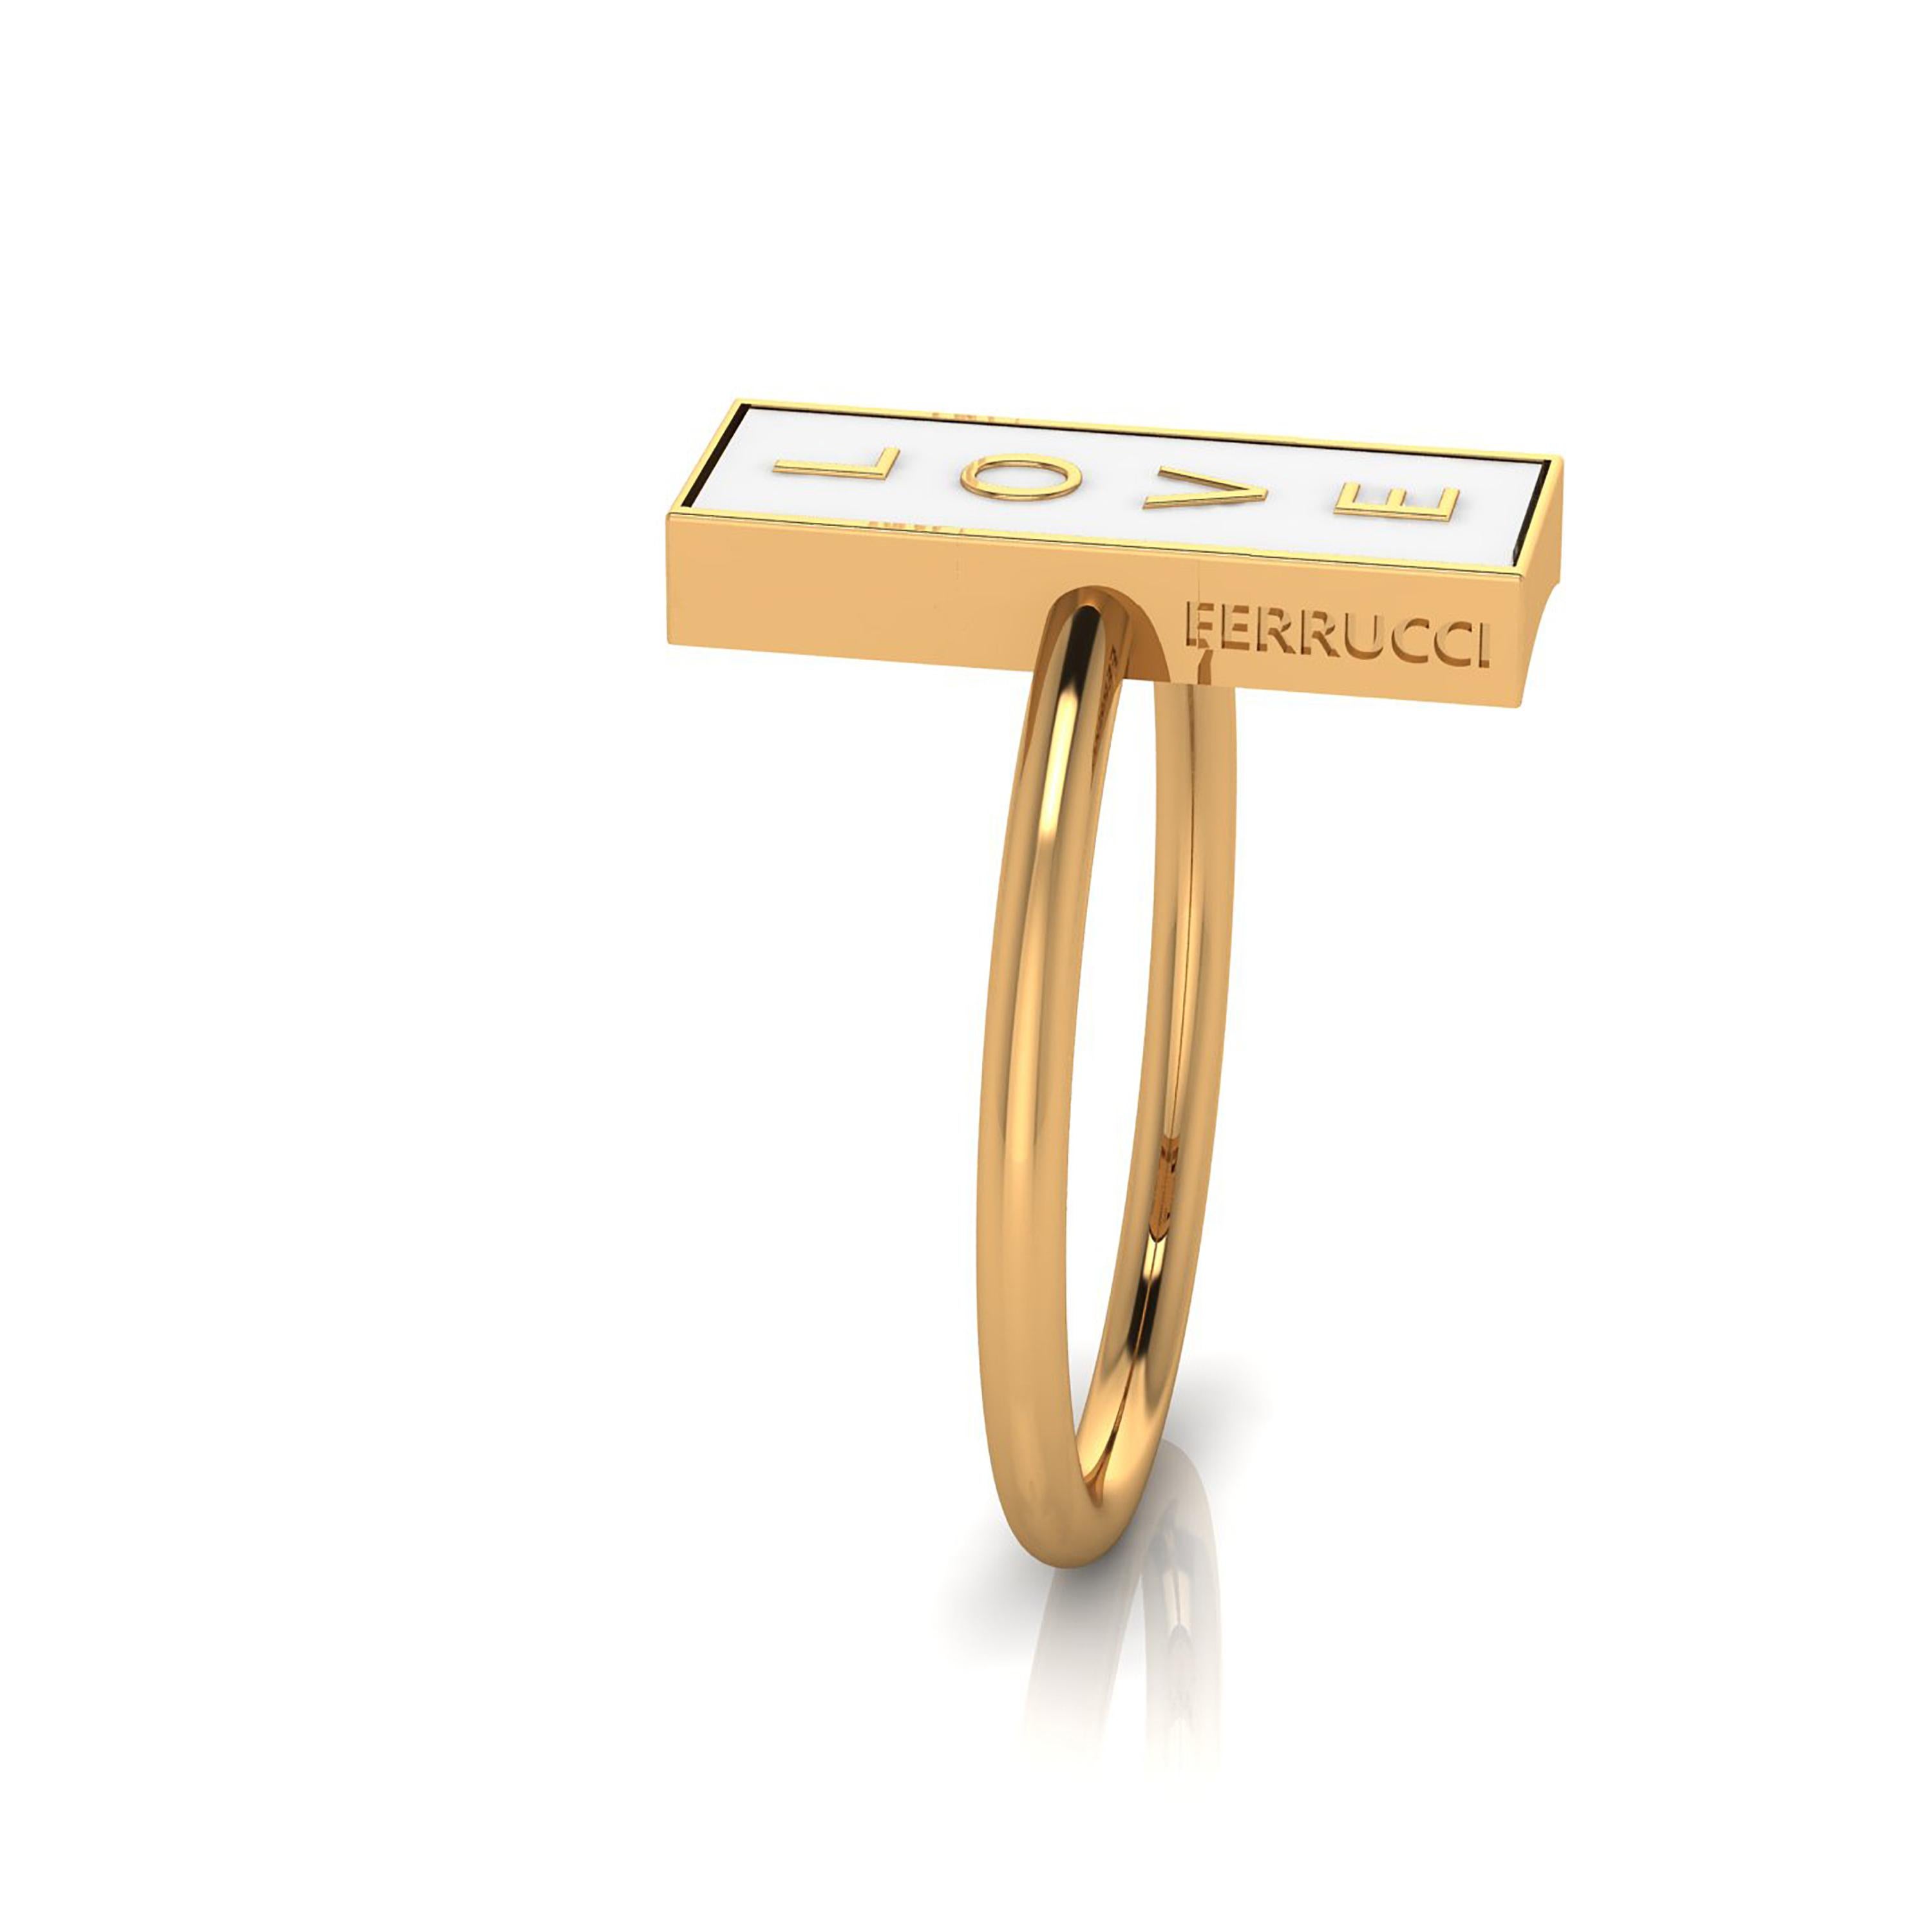 FERRUCCI The Love in white ring, conceived in 18k yellow gold, a new way to bring with you the classy, beautiful 18k yellow gold, everlasting in time, modern and bold shapes combined to create everlasting Love.
Size 6, complimentary sizing and